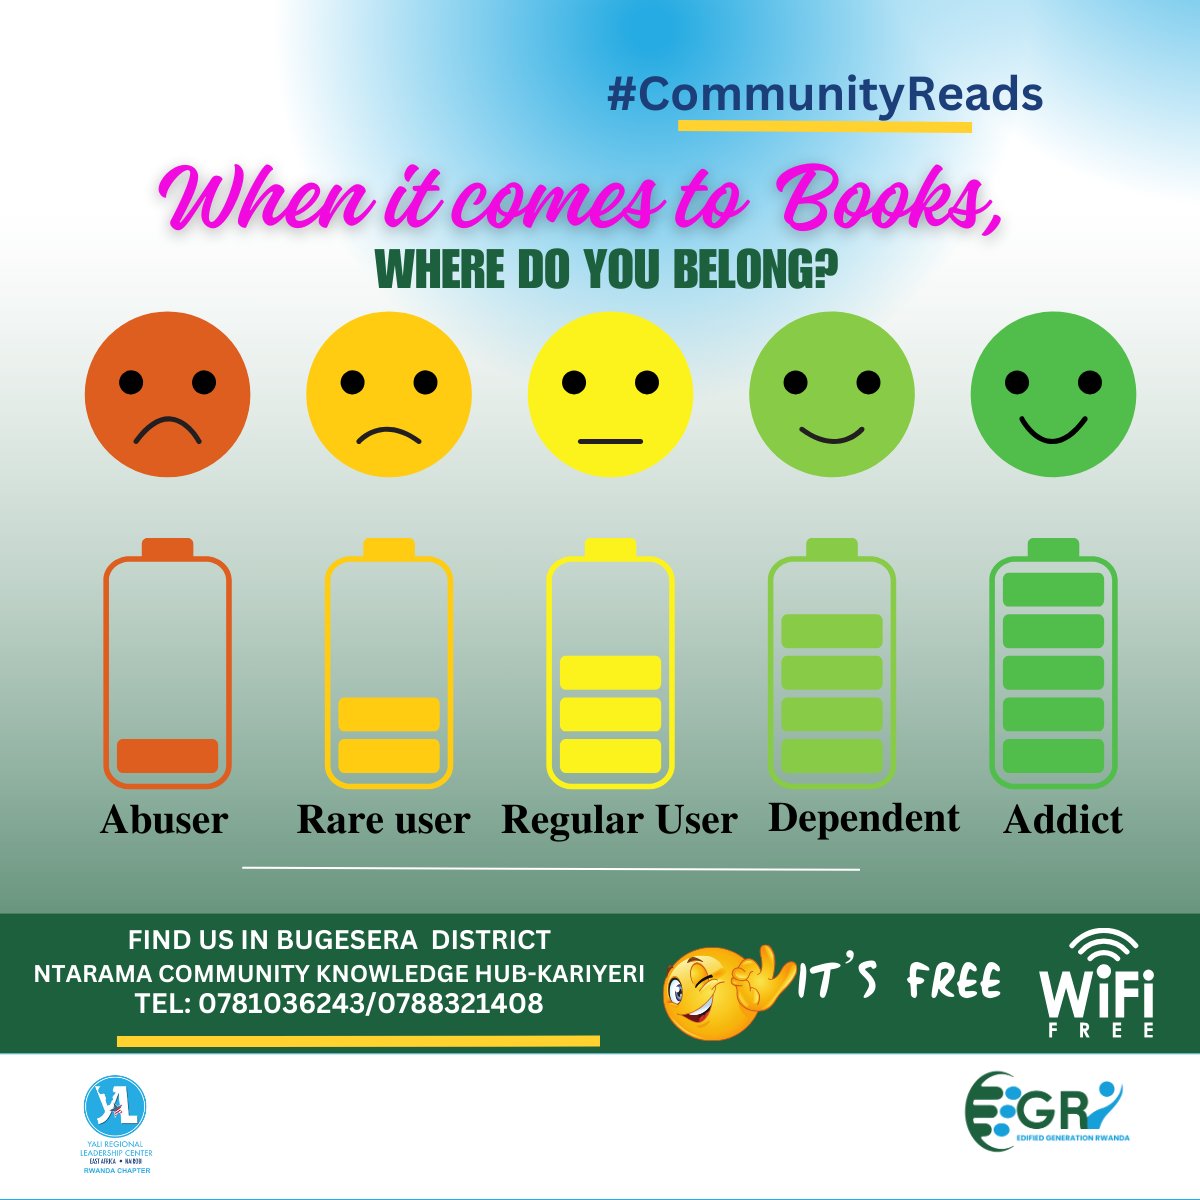 Want to boost your energy levels and live a good life? Start reading! Book addicts never die, they just turn the page to the next adventure. 📚💪 #COmmunityReads